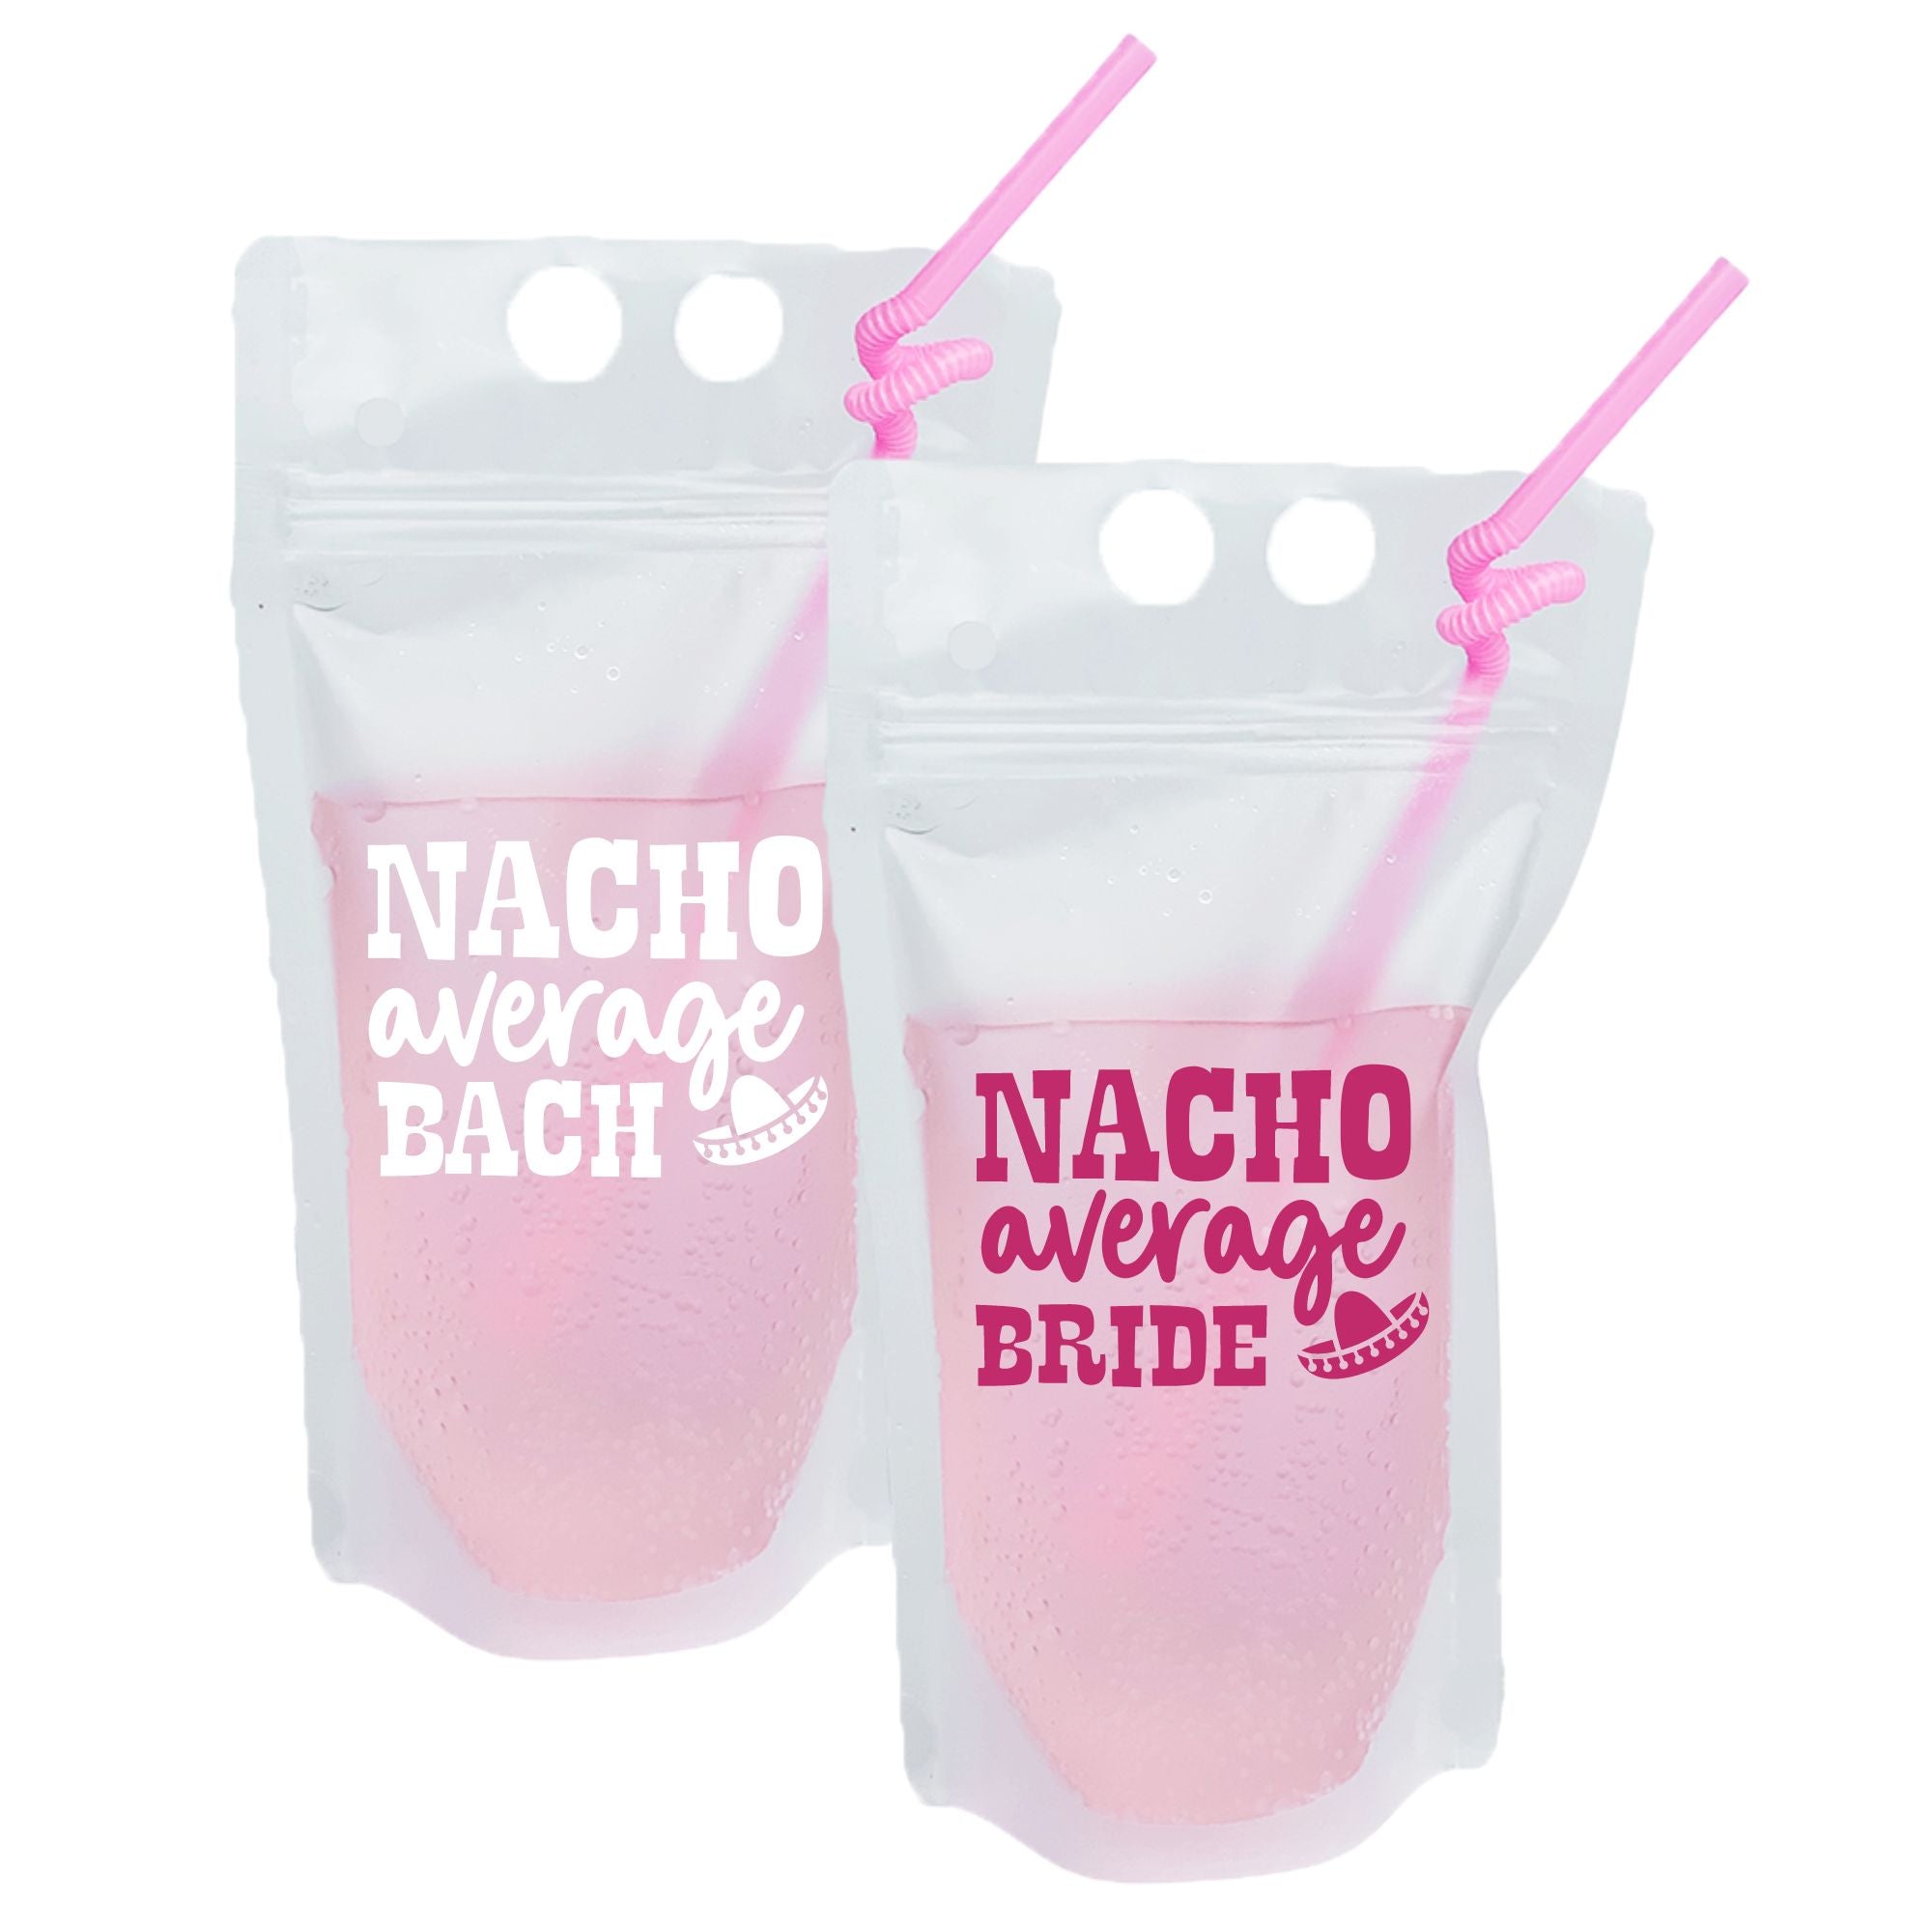 Nacho Average Bride / Bach Party Pouch - Sprinkled With Pink #bachelorette #custom #gifts